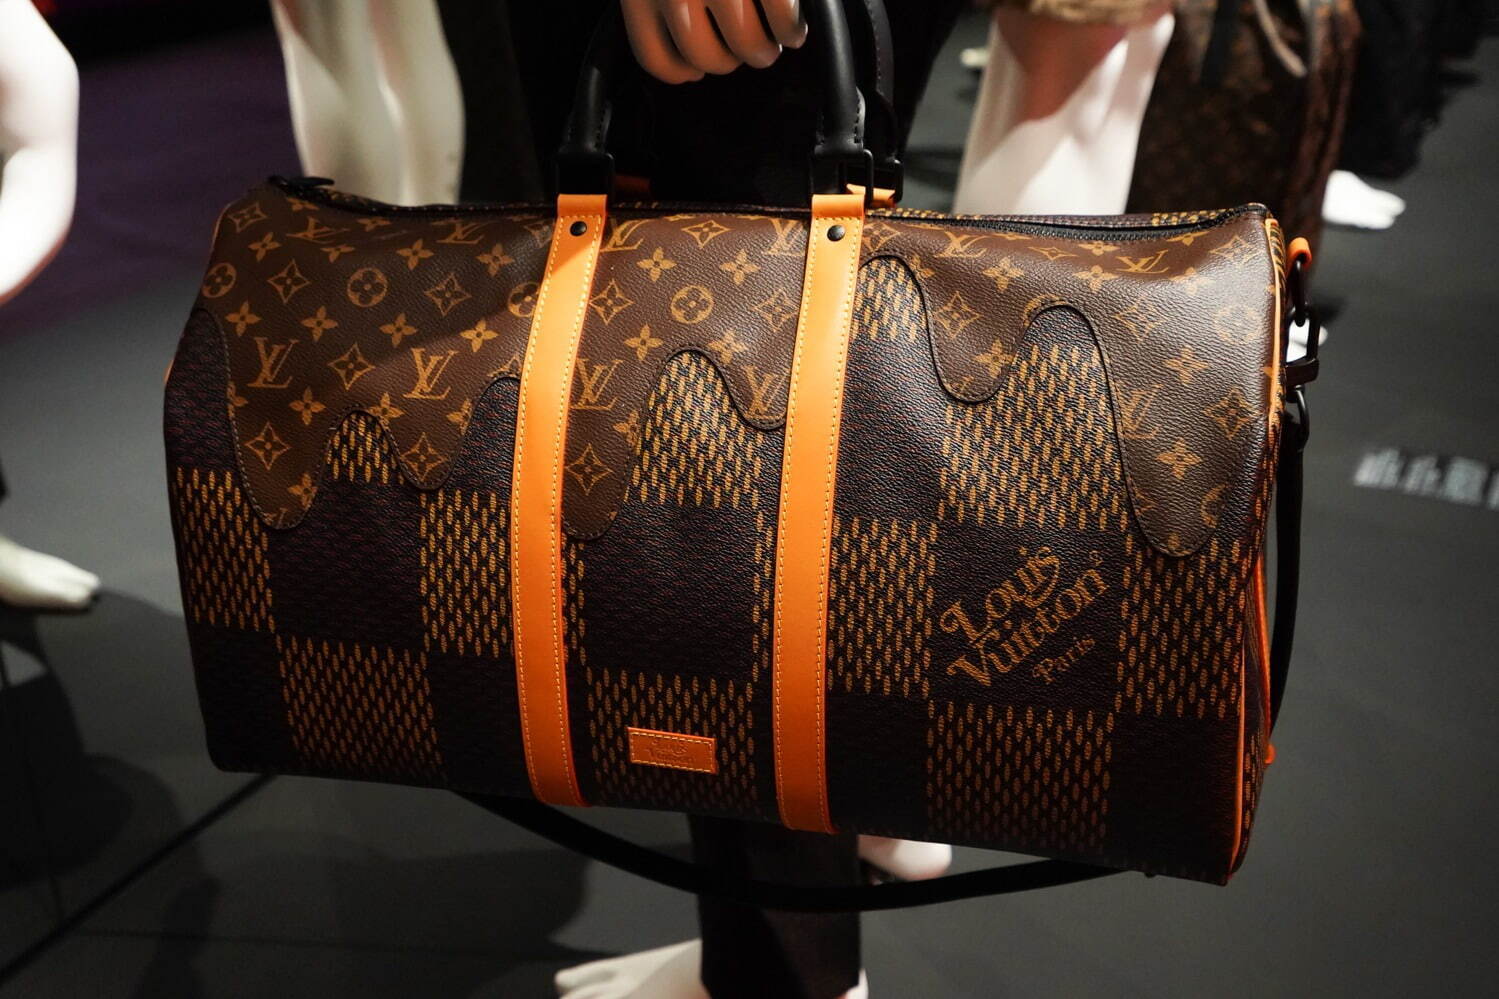 Explore 160 years of Louis Vuitton heritage at this pop-up exhibition in  Roppongi